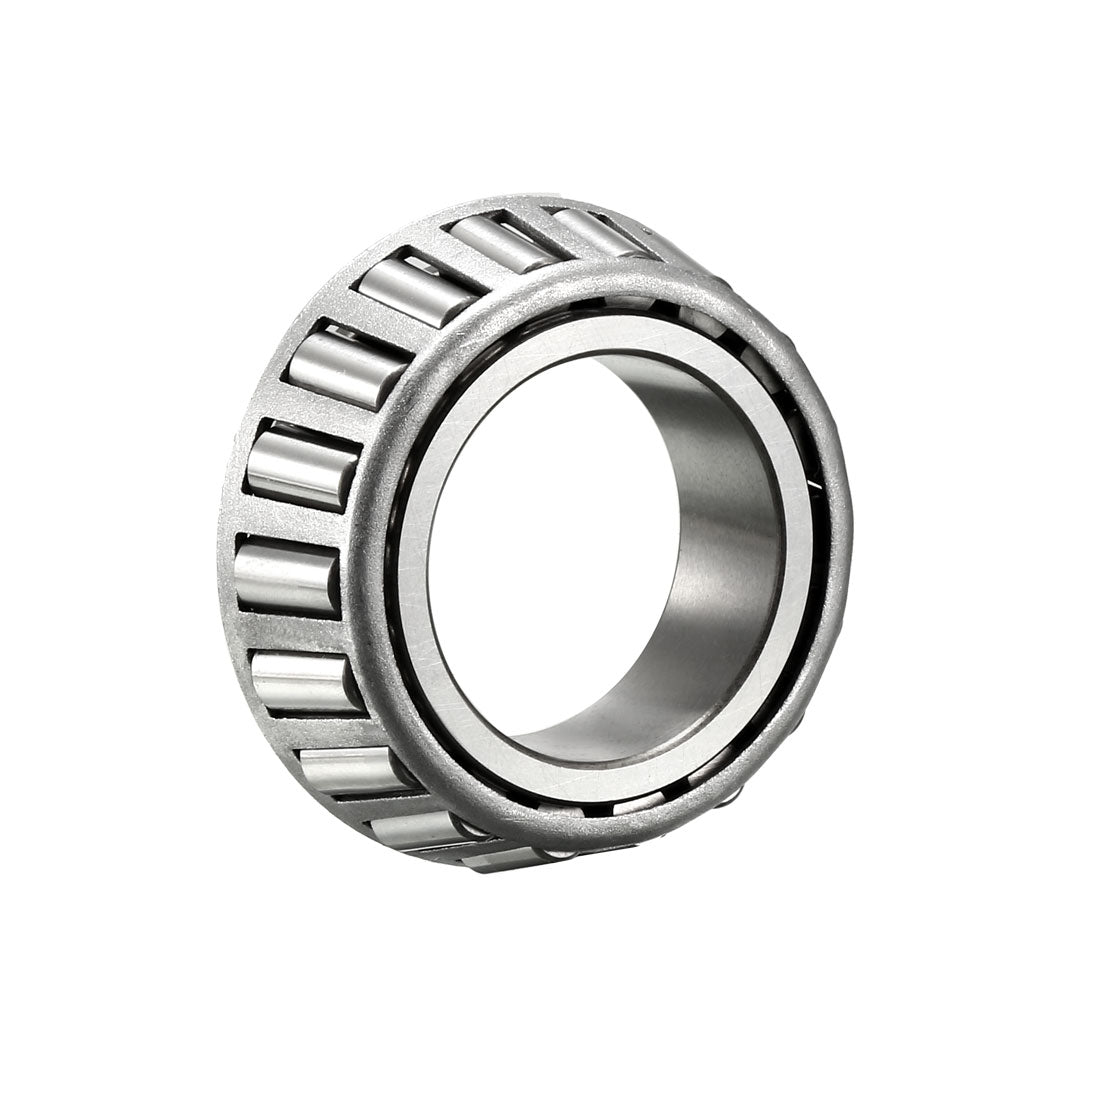 Uxcell Uxcell 16150 Tapered Roller Bearing Single Cone 1.5" Bore 0.8125" Width